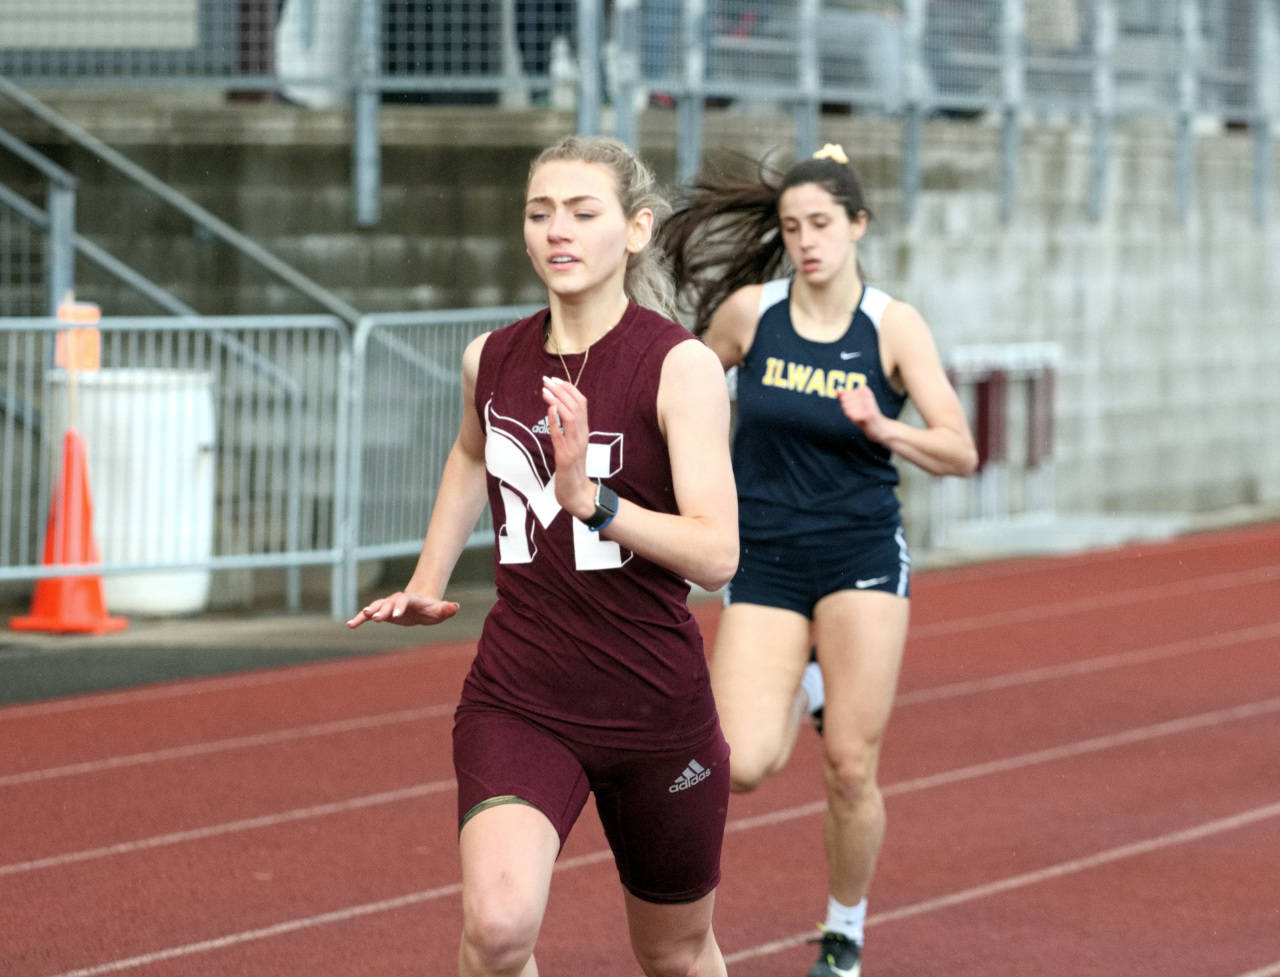 Montesano senior Madison Olson, left, sprints down the home stretch of the girls 400 meter race on Wednesday in Montesano. Olson edged Ilwaco’s Erika Glenn, right, by less than two seconds to win the race. (Ryan Sparks | The Daily World)